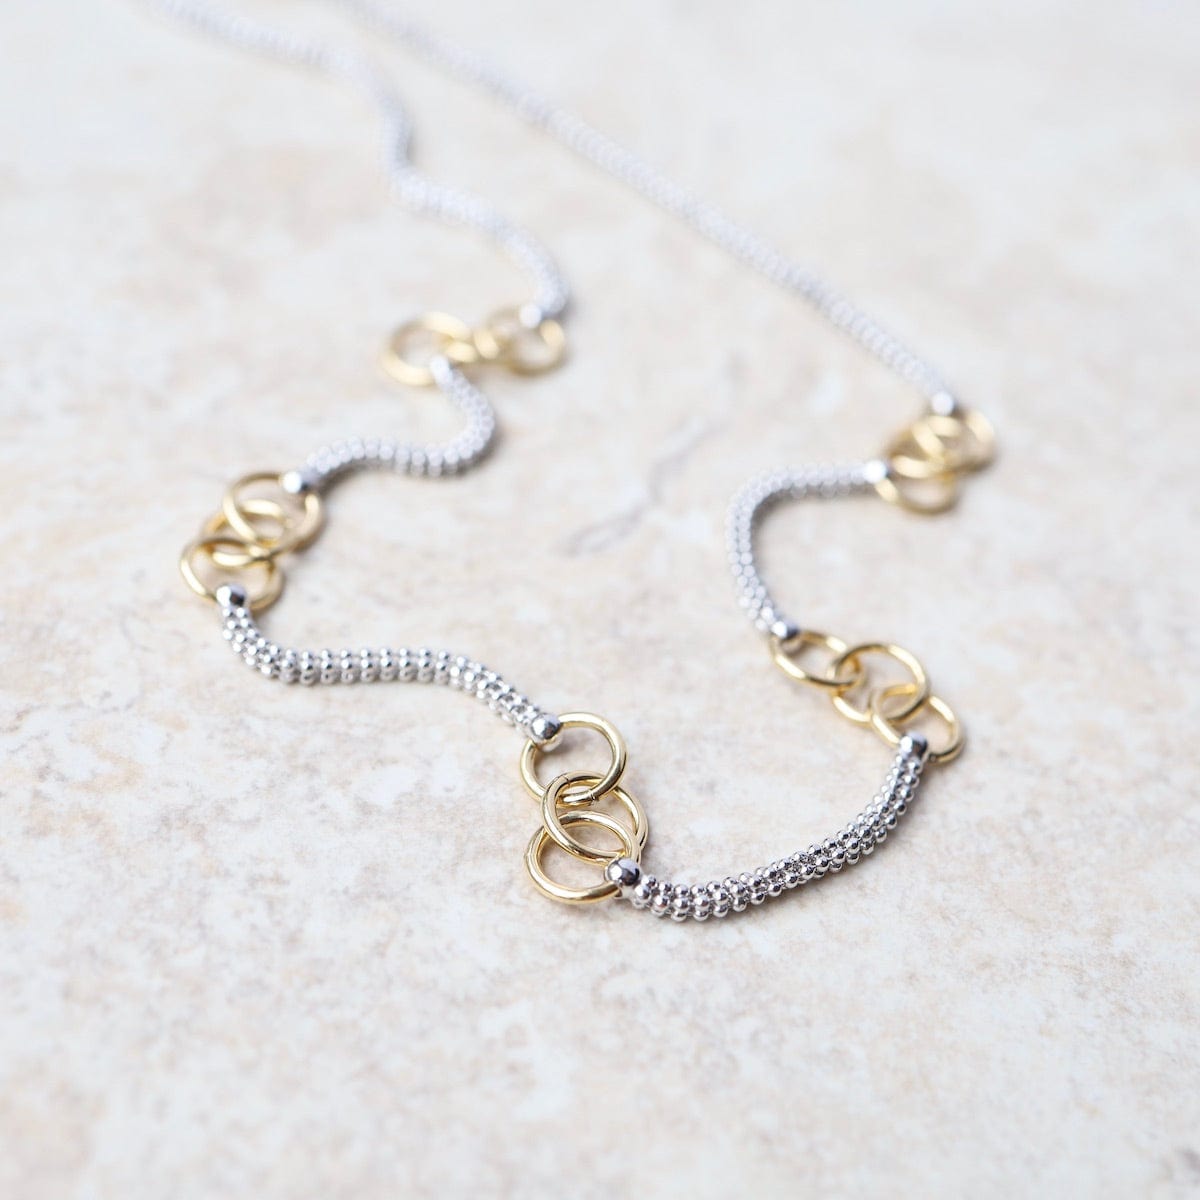 NKL-GPL Chain & Circles Necklace